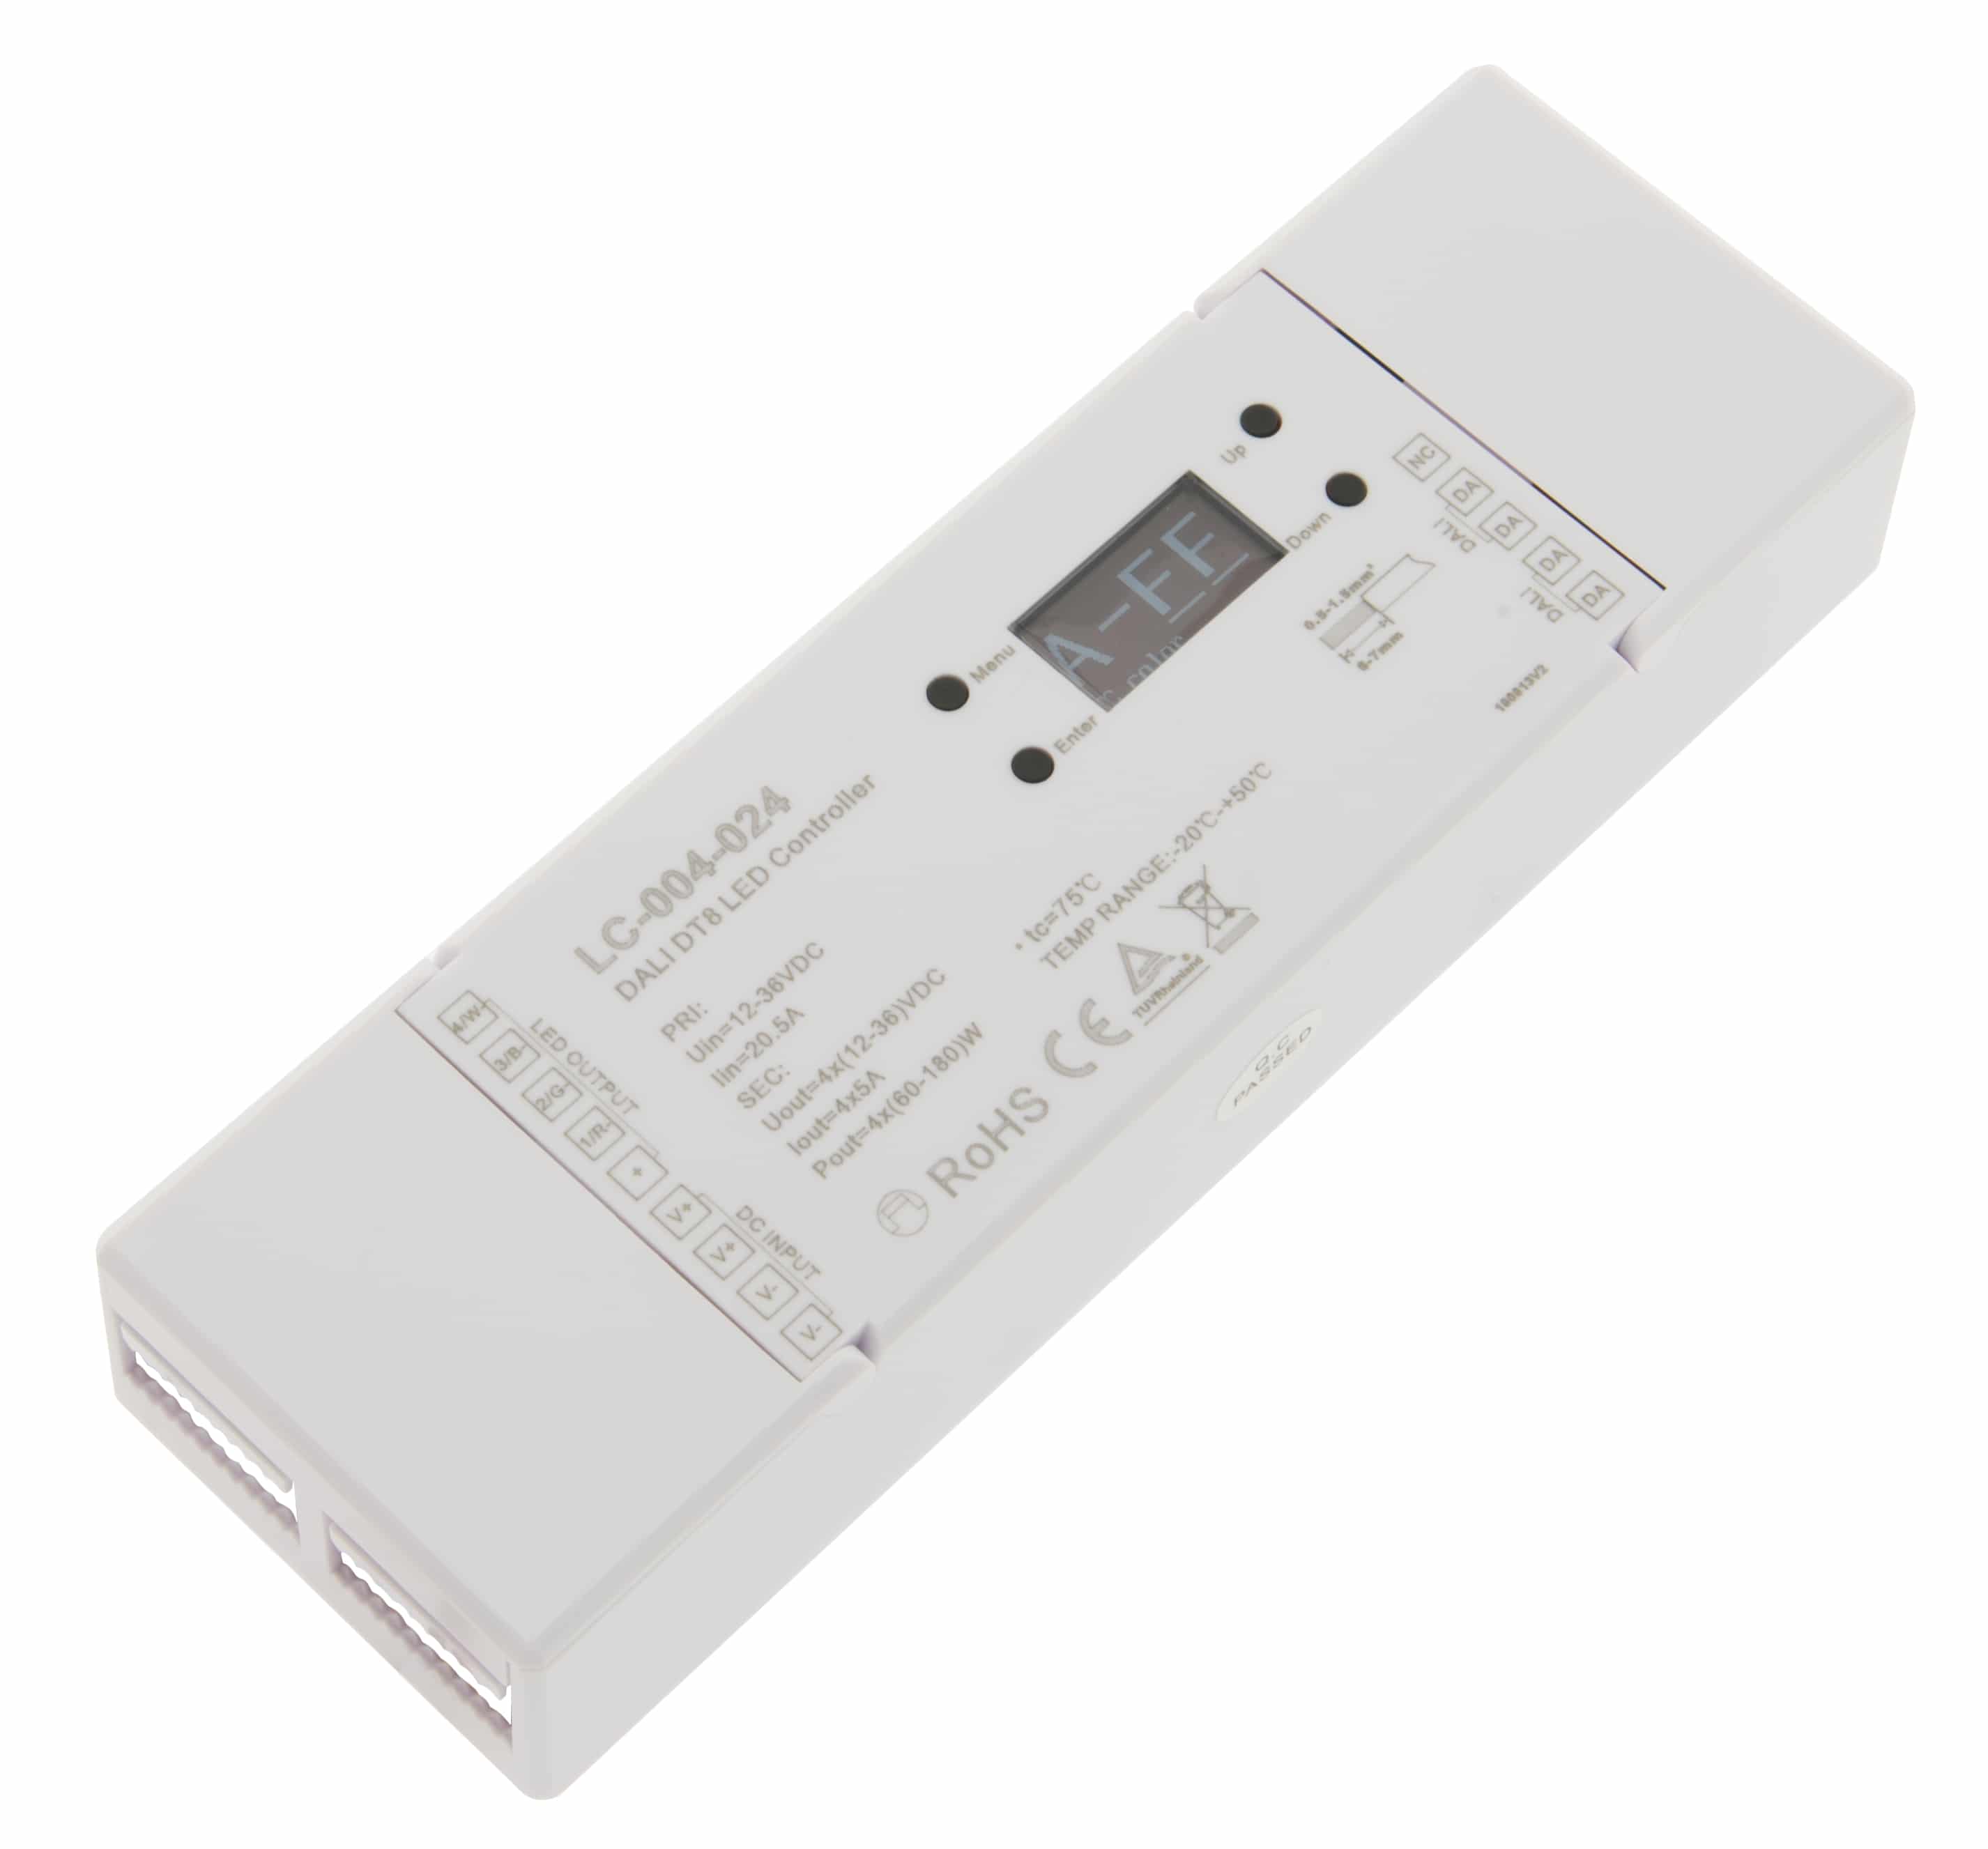 LED DALI PWM Dimmer 4 Channel - DT8 with OLED Display